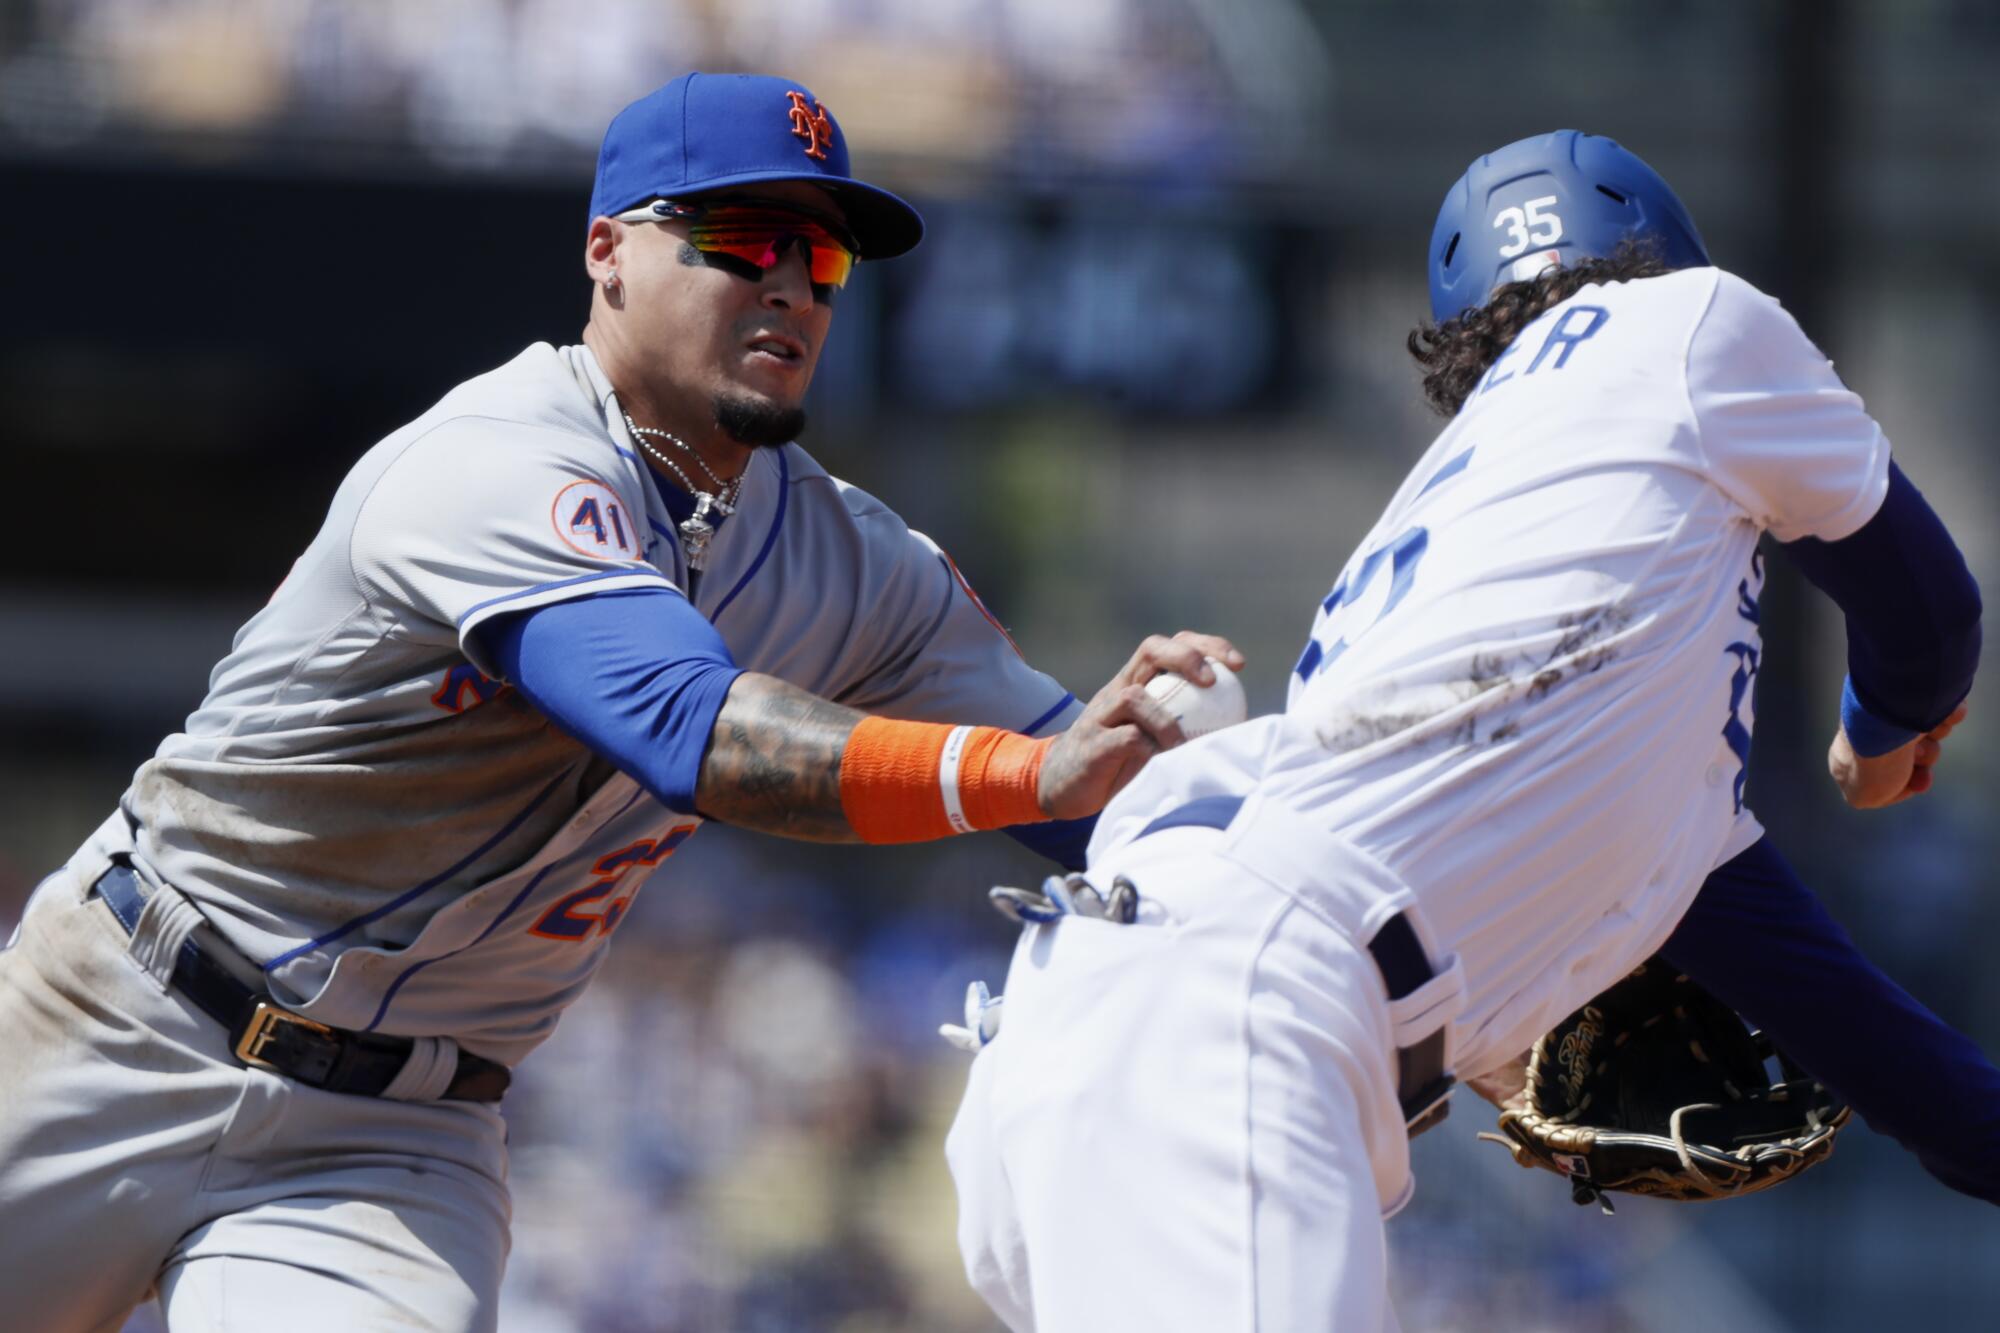 Emotional NY Mets' Dominic Smith talks fight against racism